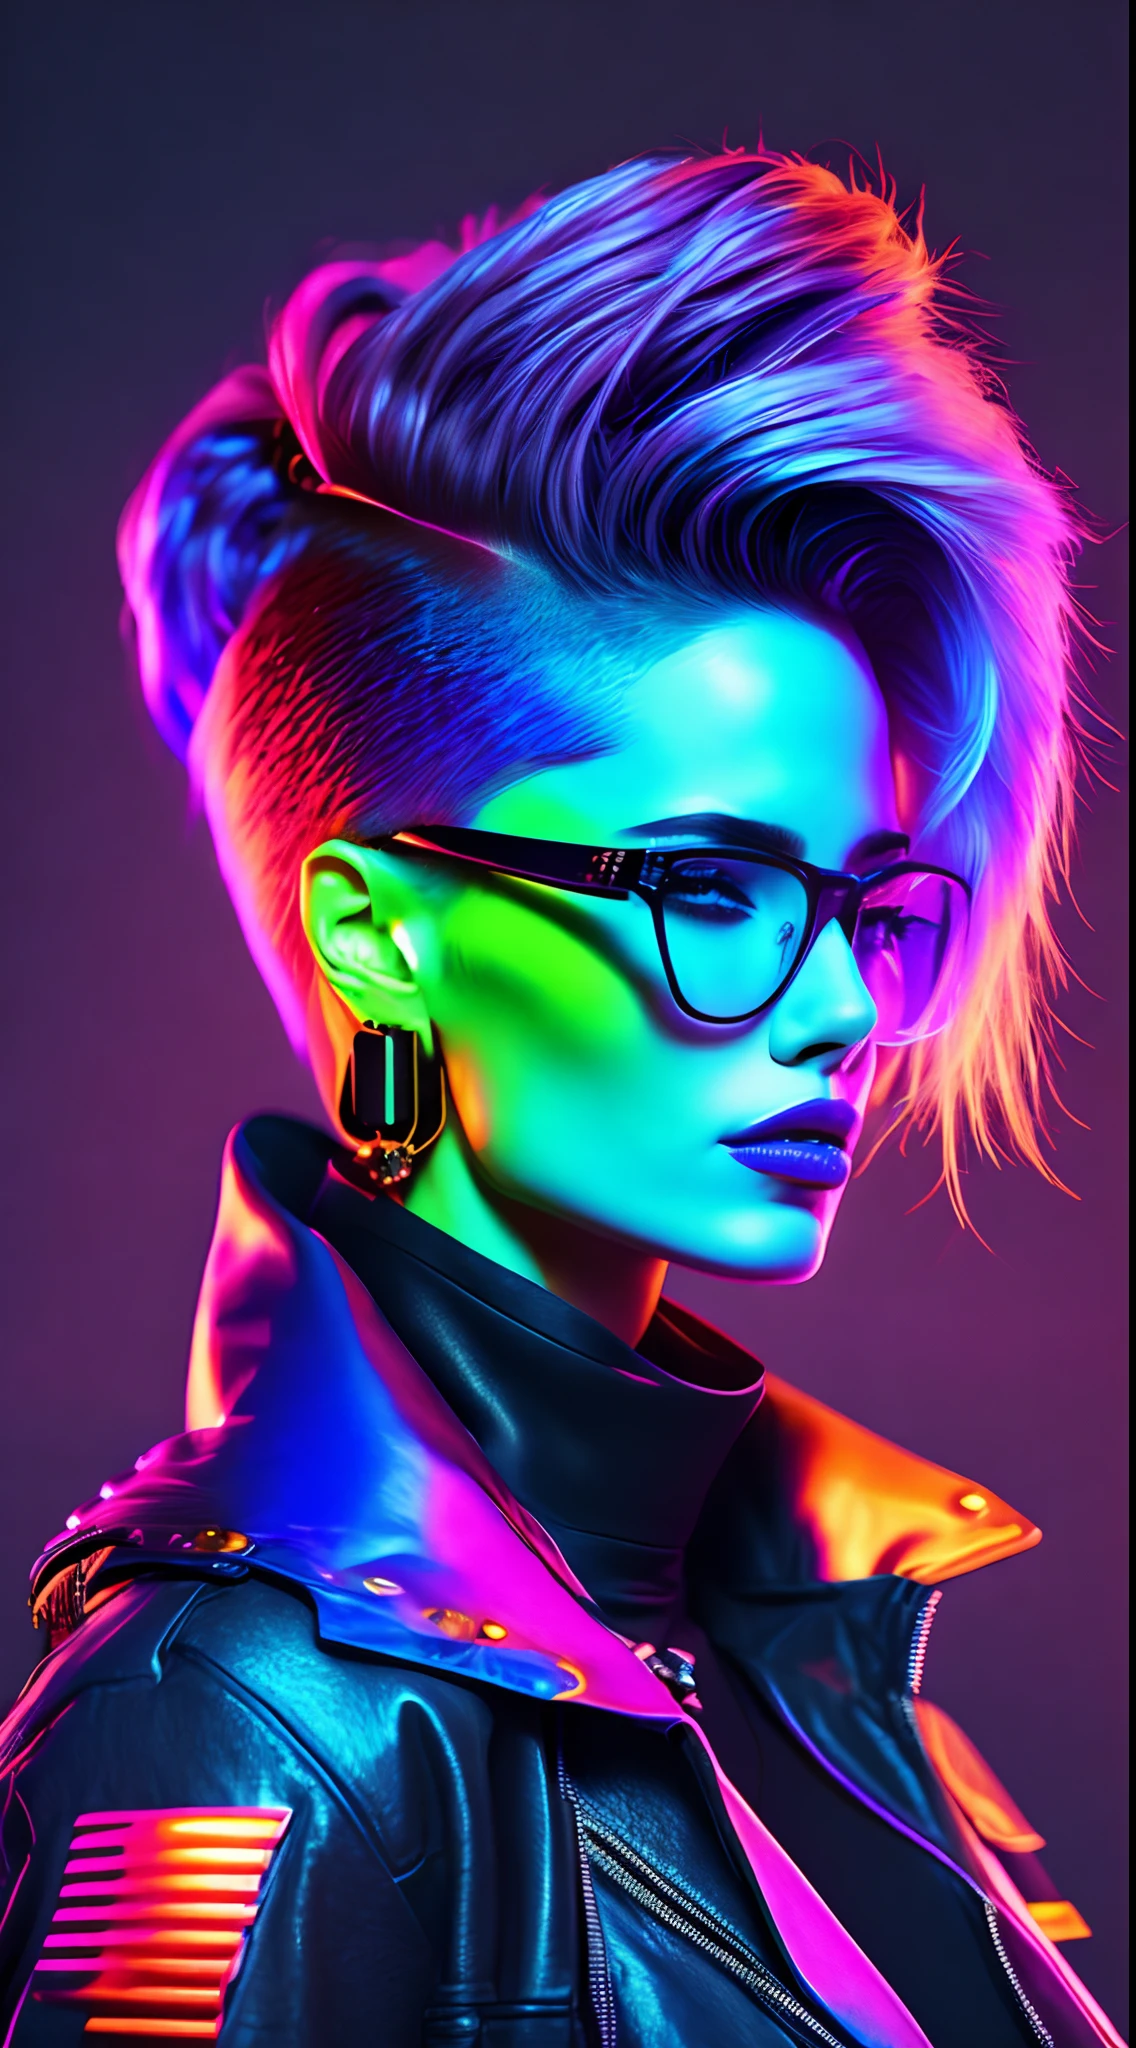 Seed 321 An ALBANIA woman with a short mohawk ,glasses and earrings, high texture,Punk rock and latex leather jacket, portrait color glamour, detailed portrait, high-quality portrait, neon color bleed, color studio portrait, ultraviolet and neon colors, illustration , vibrant colors hyper realism, vibrant neon colors, pop and vibrant colors, Fashion Yes.be, cor neon, cyberpunk style color, iridescent illustration